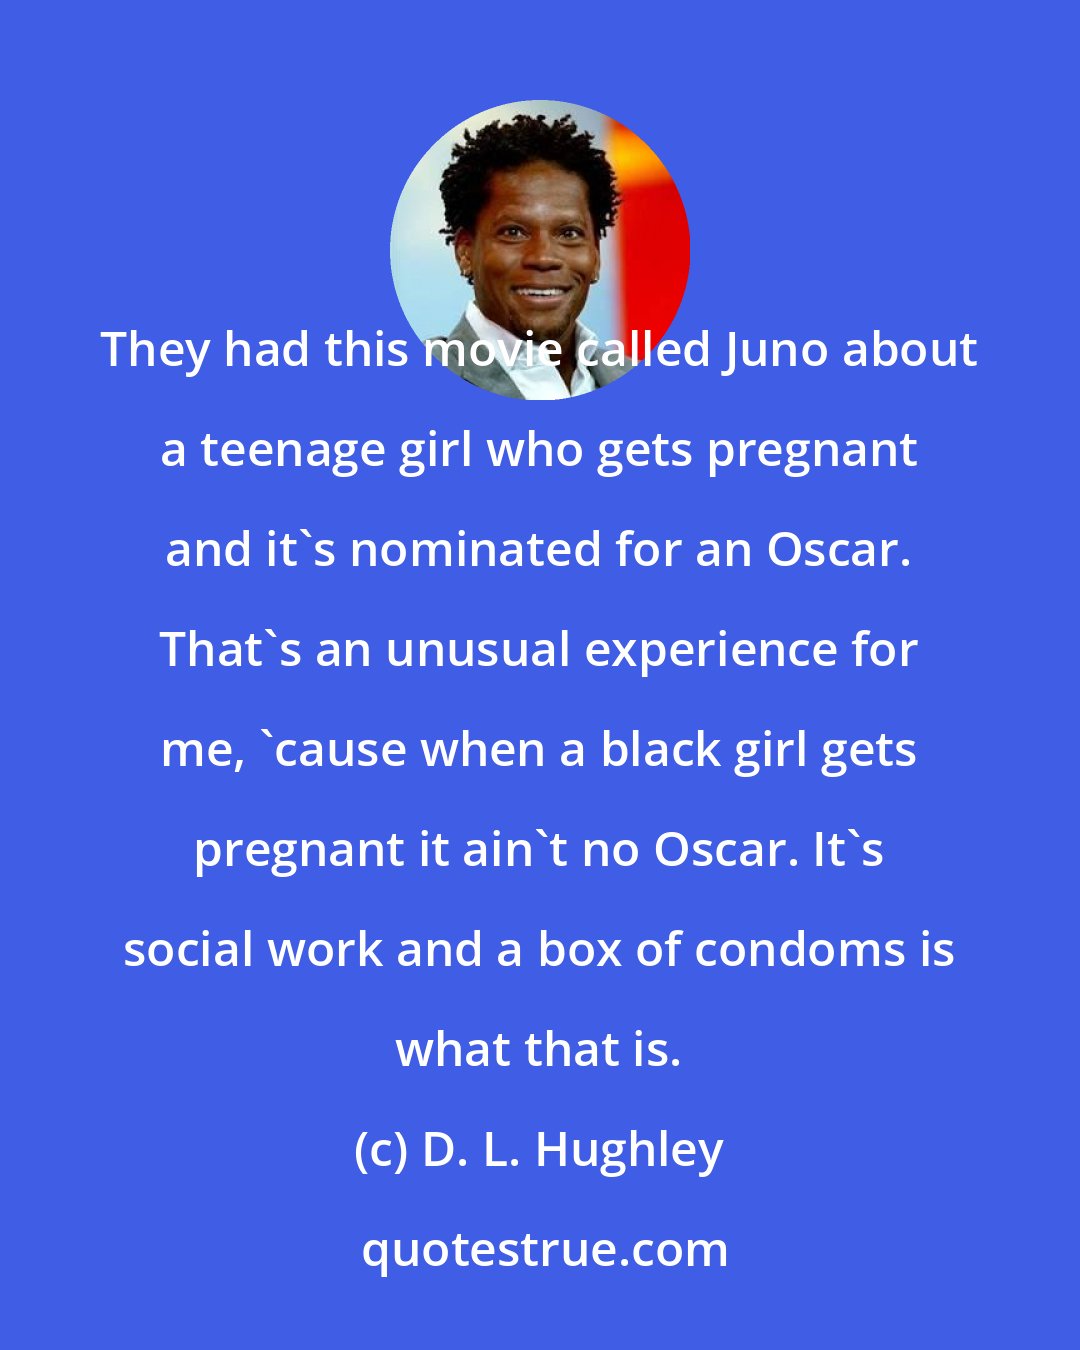 D. L. Hughley: They had this movie called Juno about a teenage girl who gets pregnant and it's nominated for an Oscar. That's an unusual experience for me, 'cause when a black girl gets pregnant it ain't no Oscar. It's social work and a box of condoms is what that is.